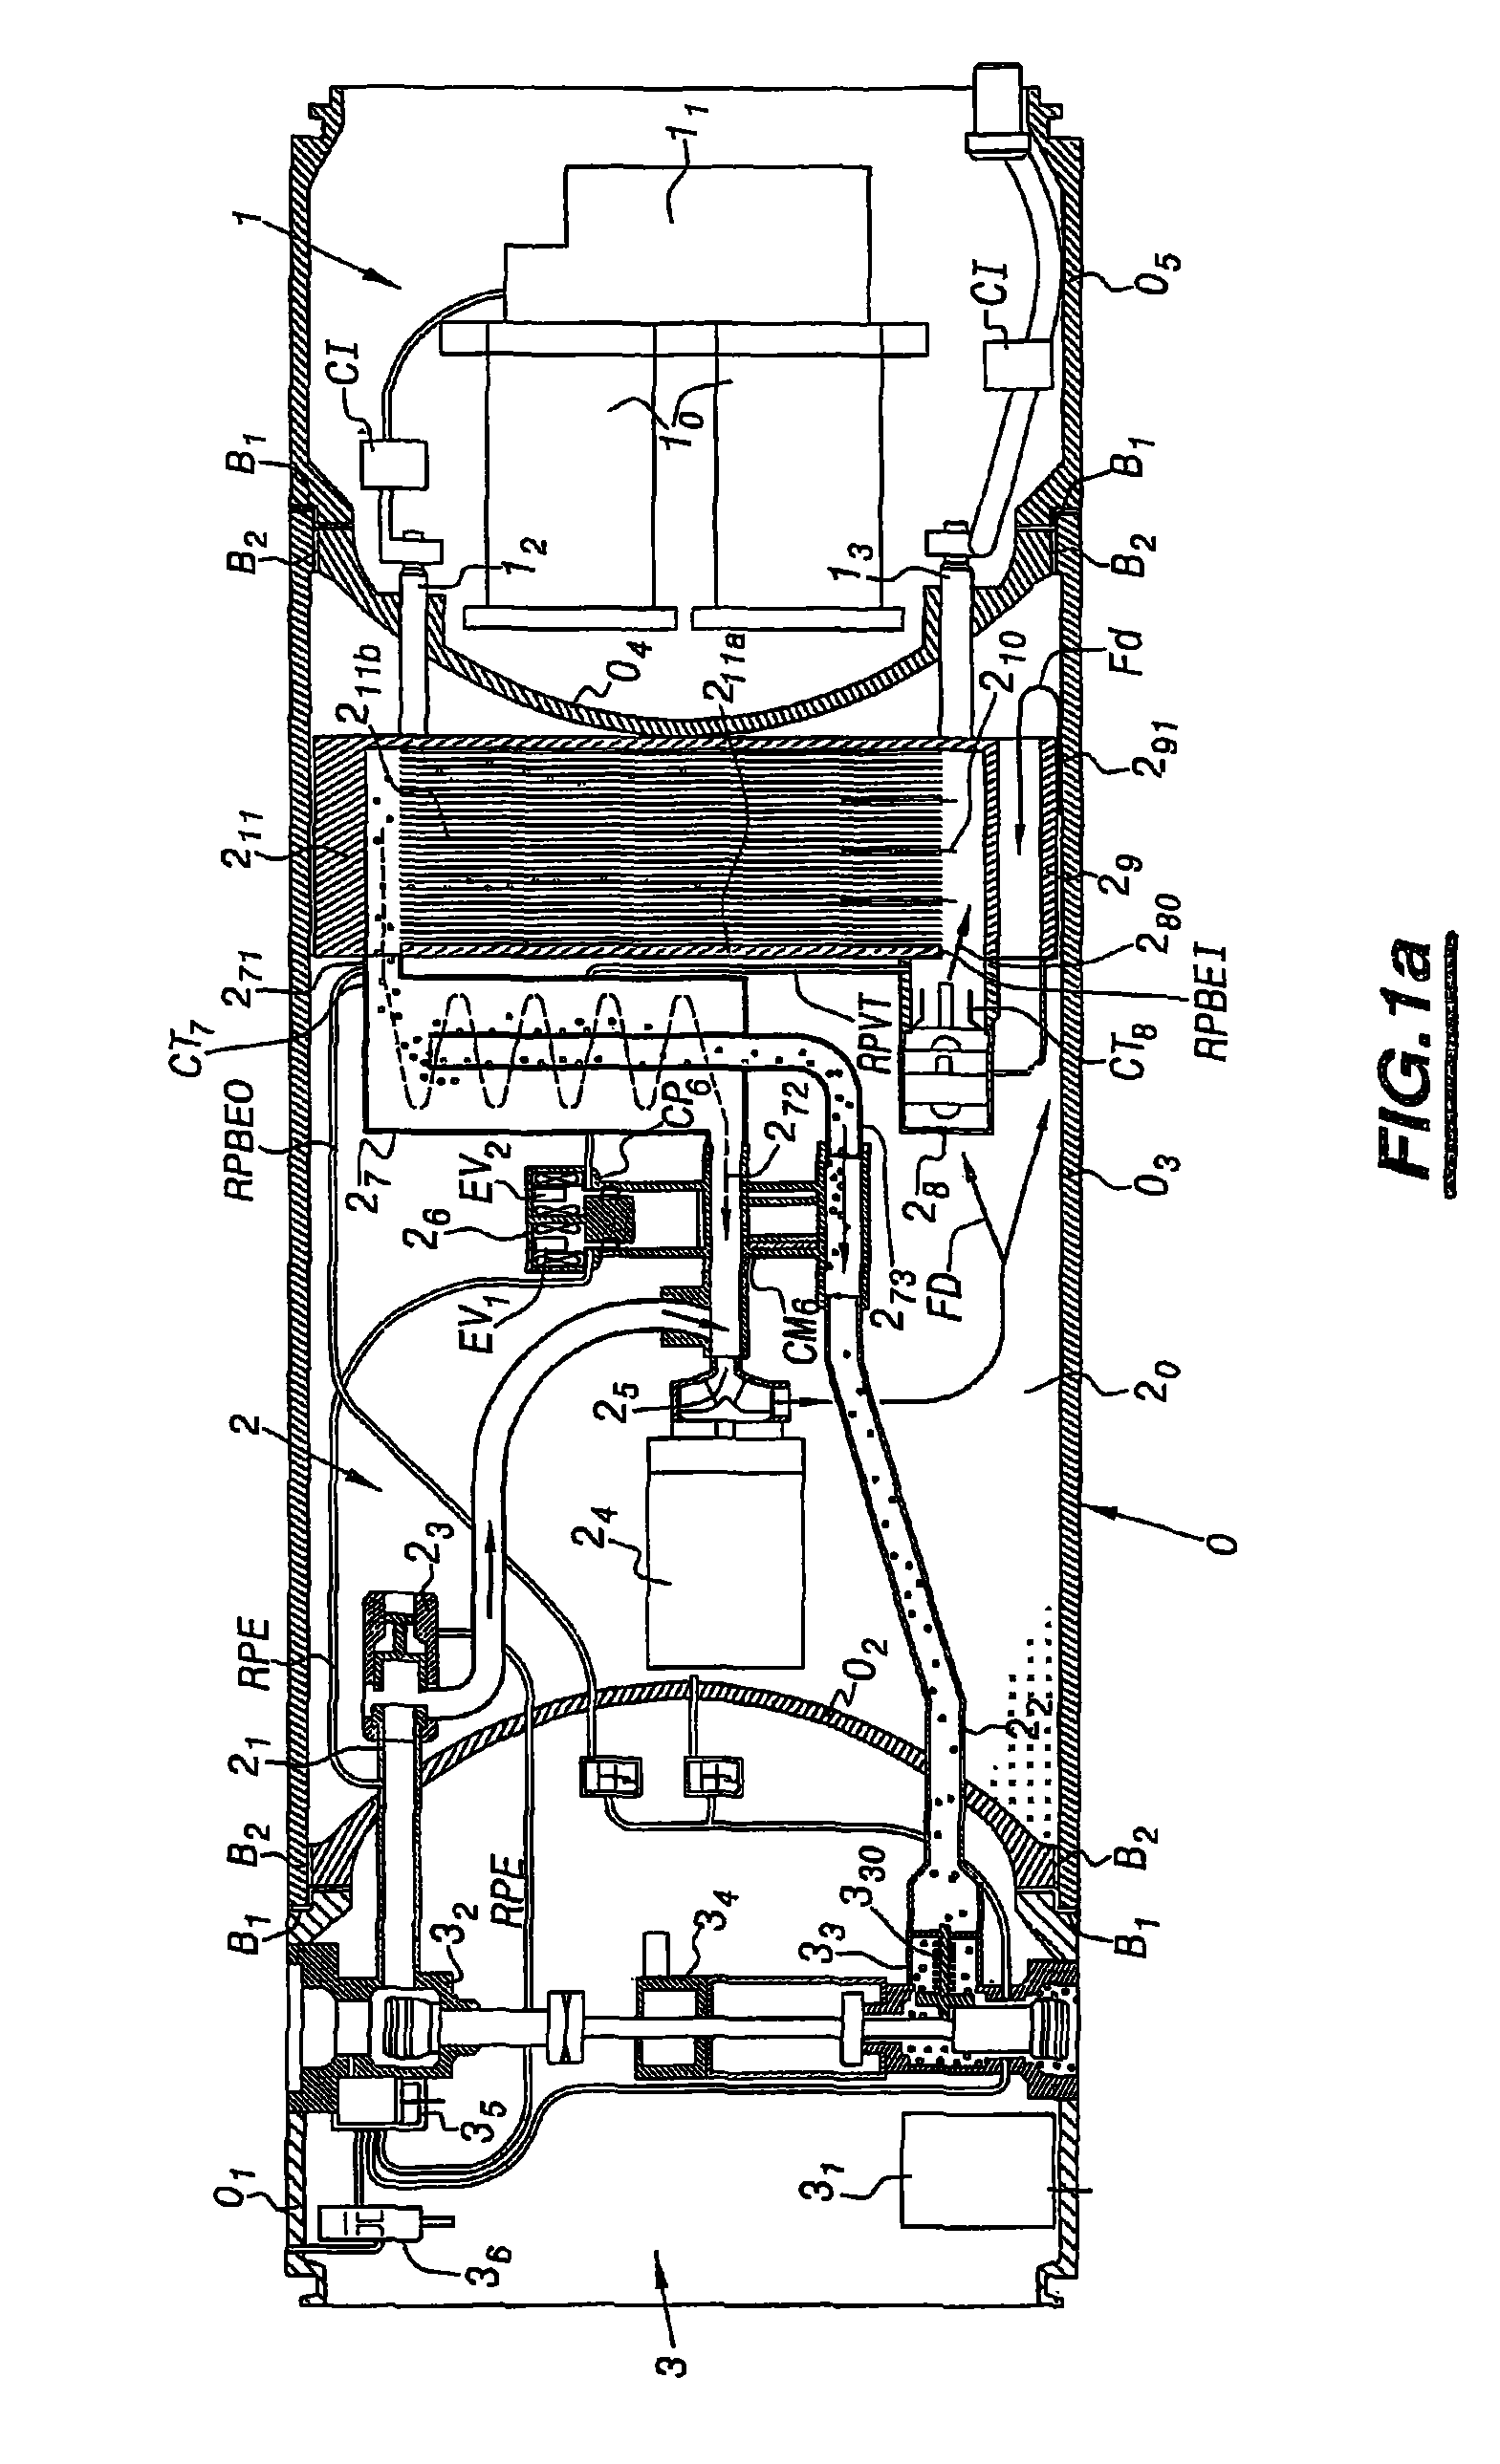 Propulsion cell for a device in an aquatic medium